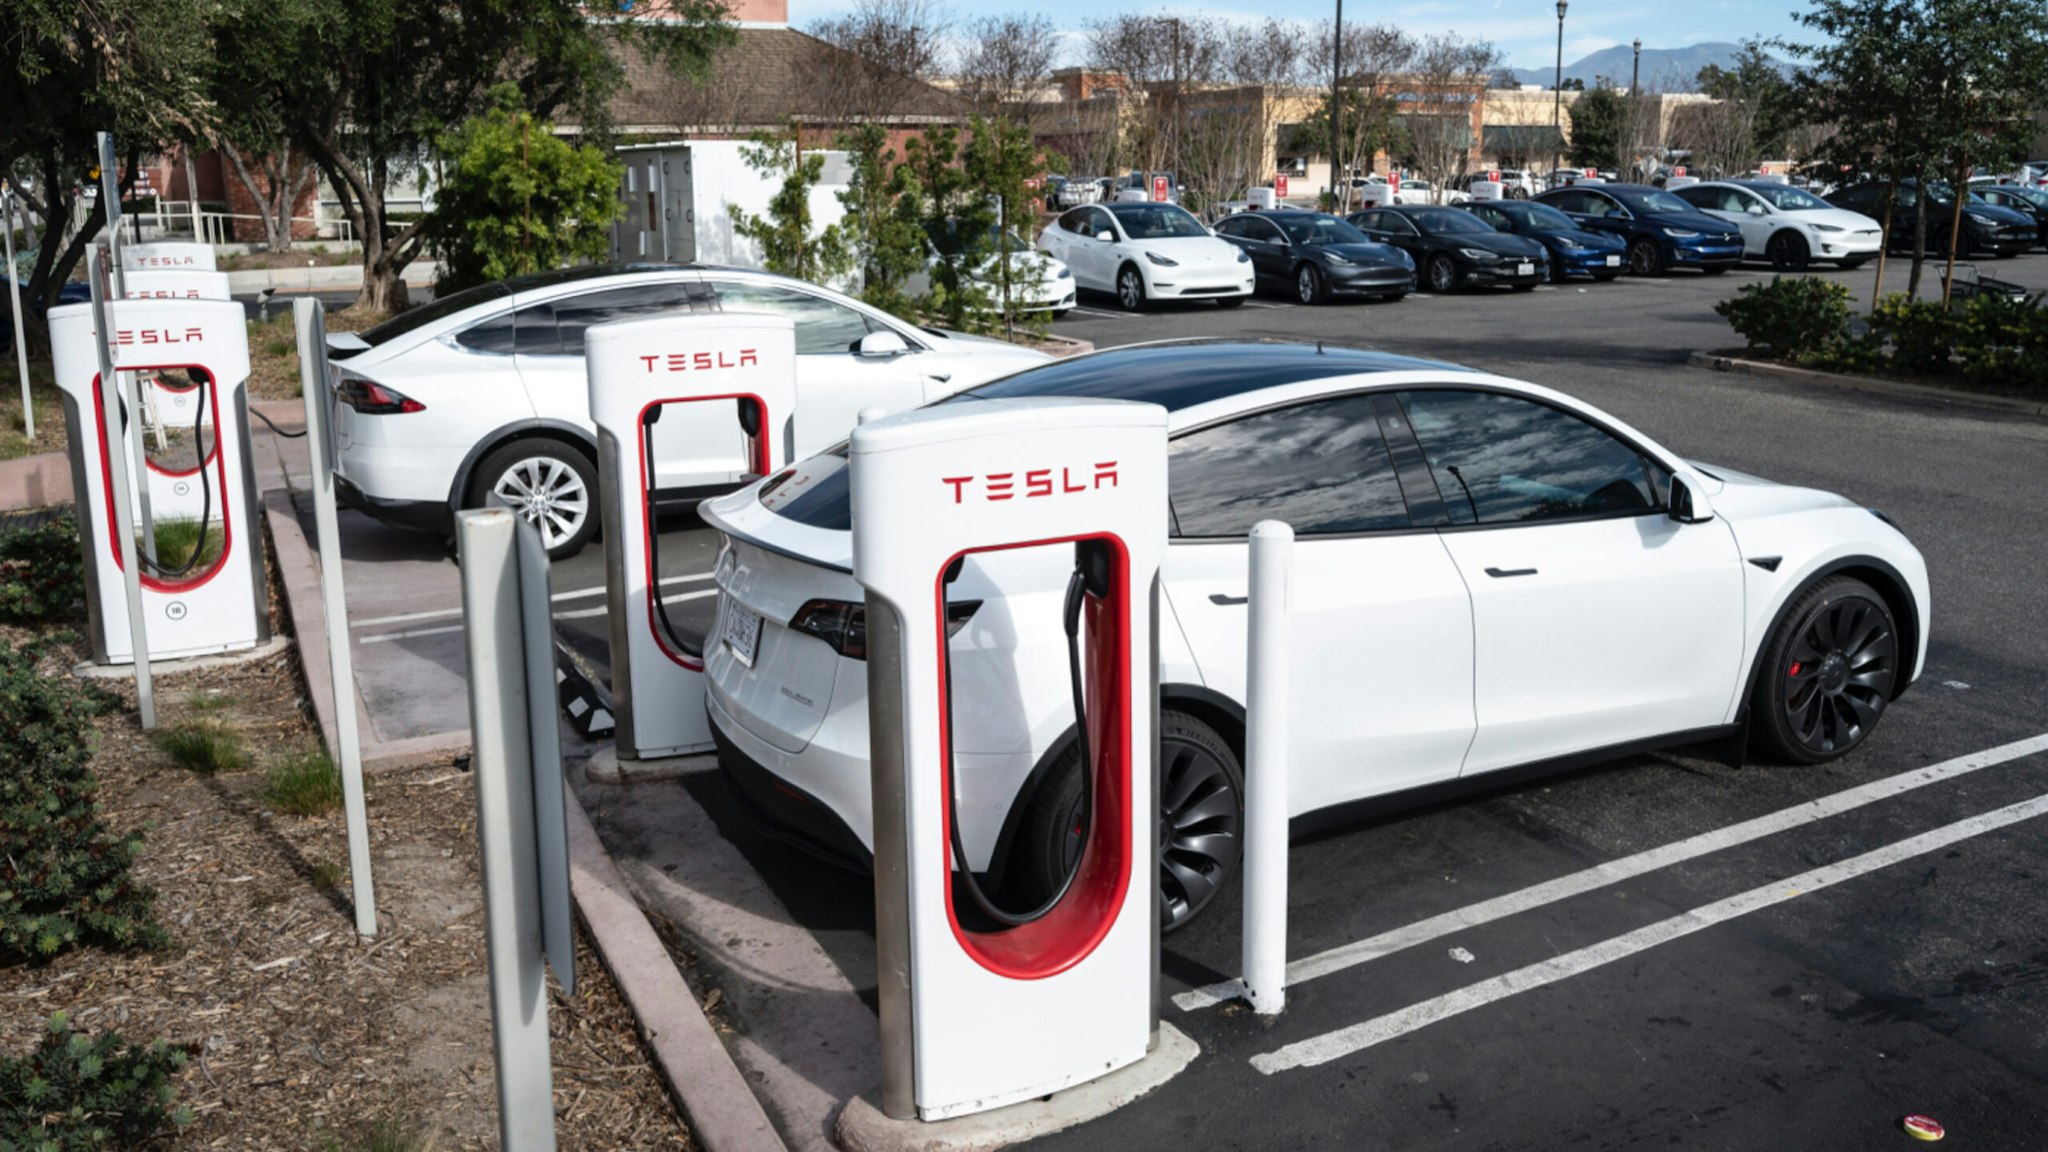 Tesla cars charge at a Supercharger station on Culver Ave. in Irvine, CA on Friday, January 28, 2022.